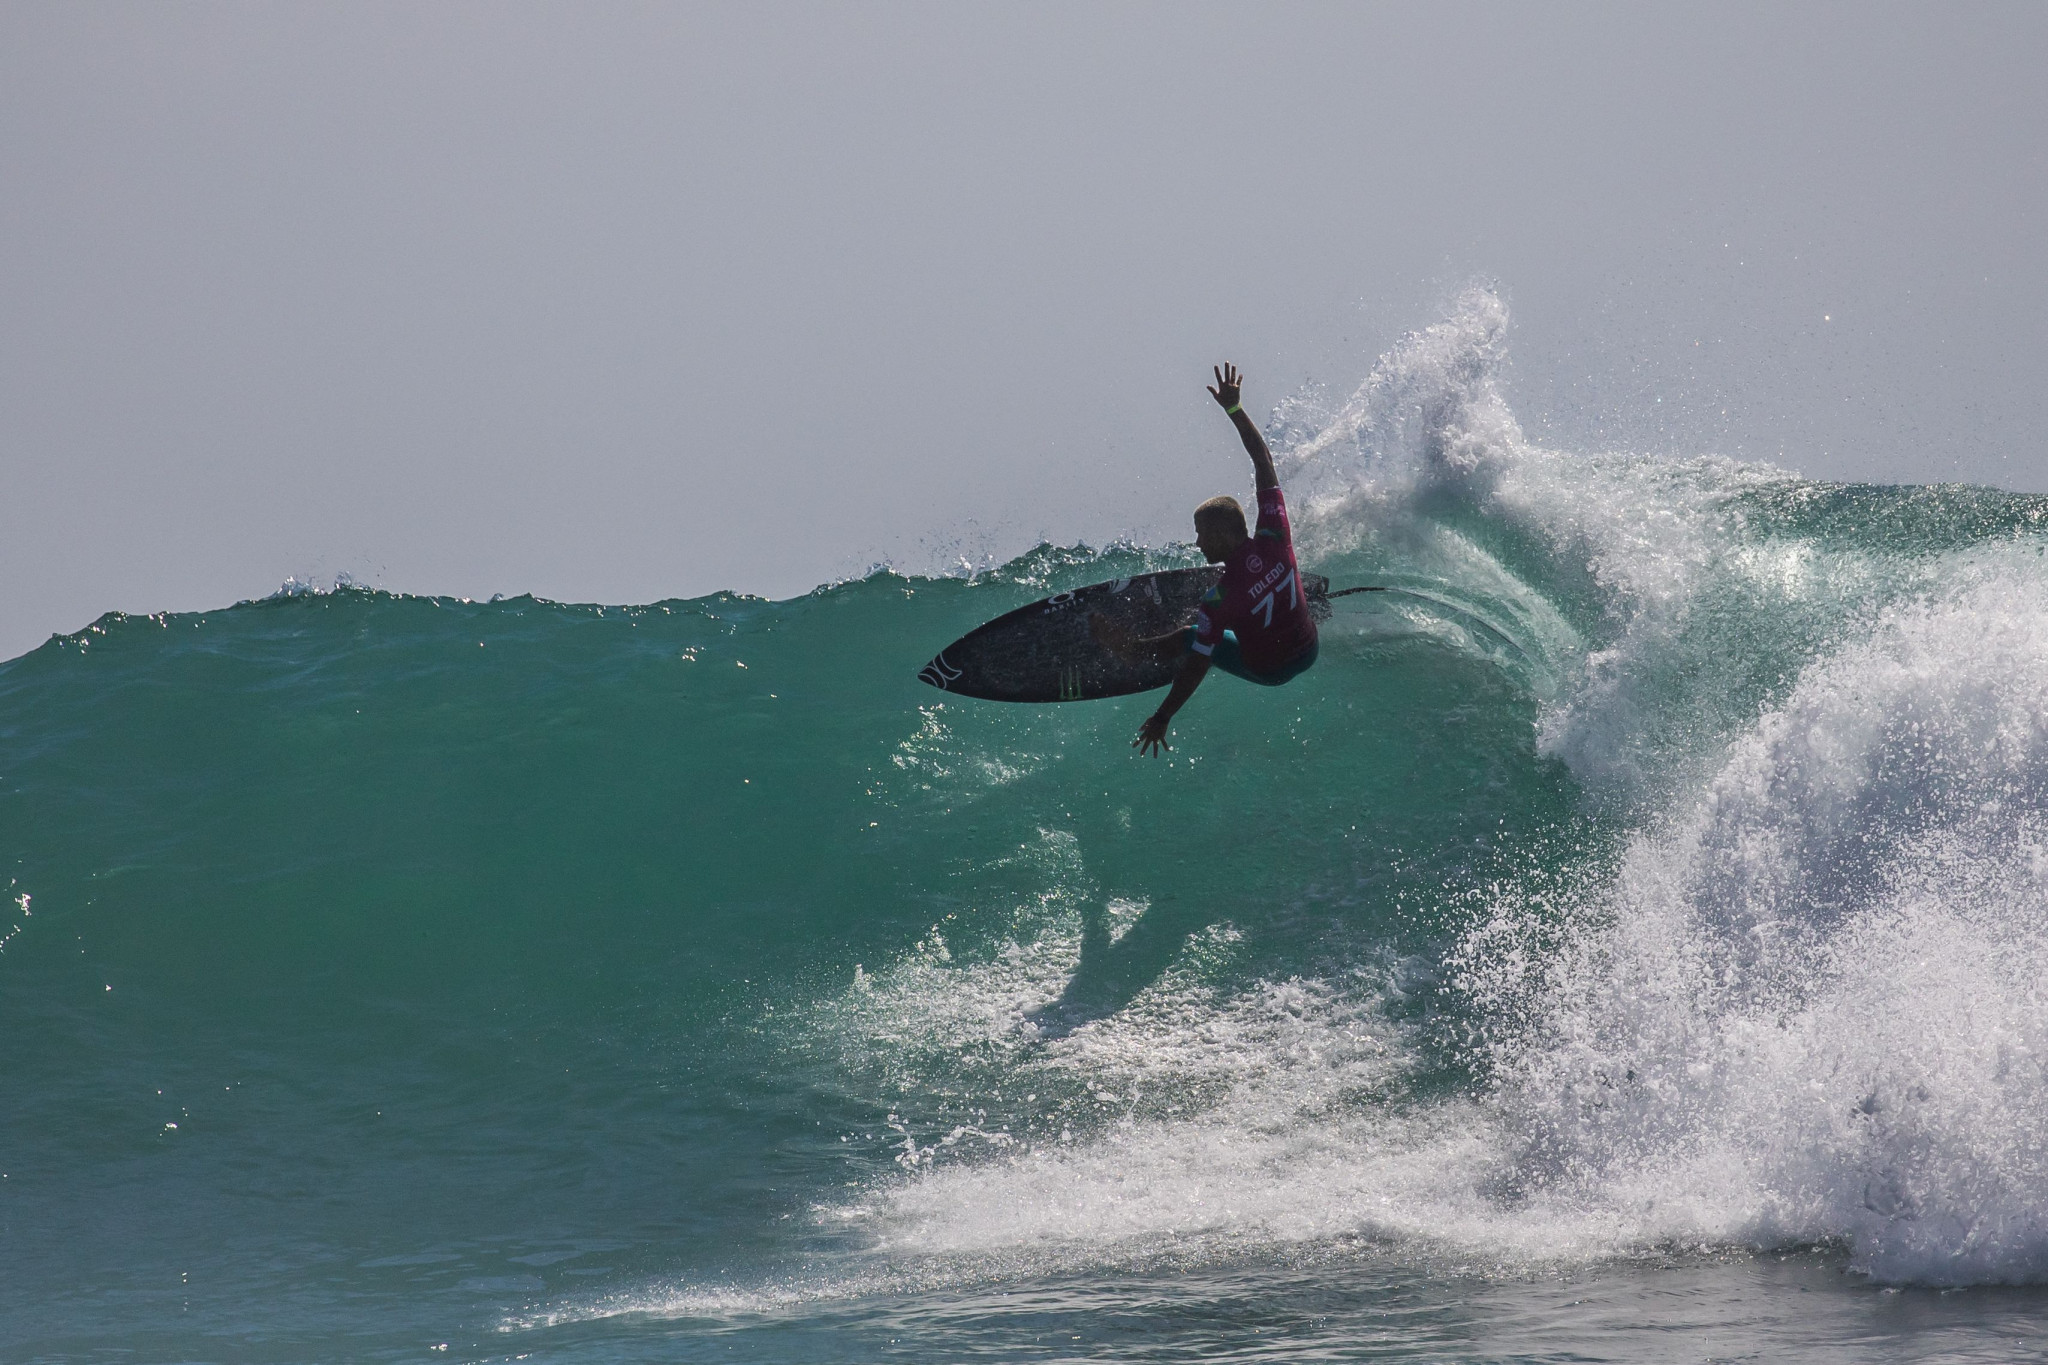 Toledo and Wright triumph at World Surf League Championship Tour event at Bells Beach